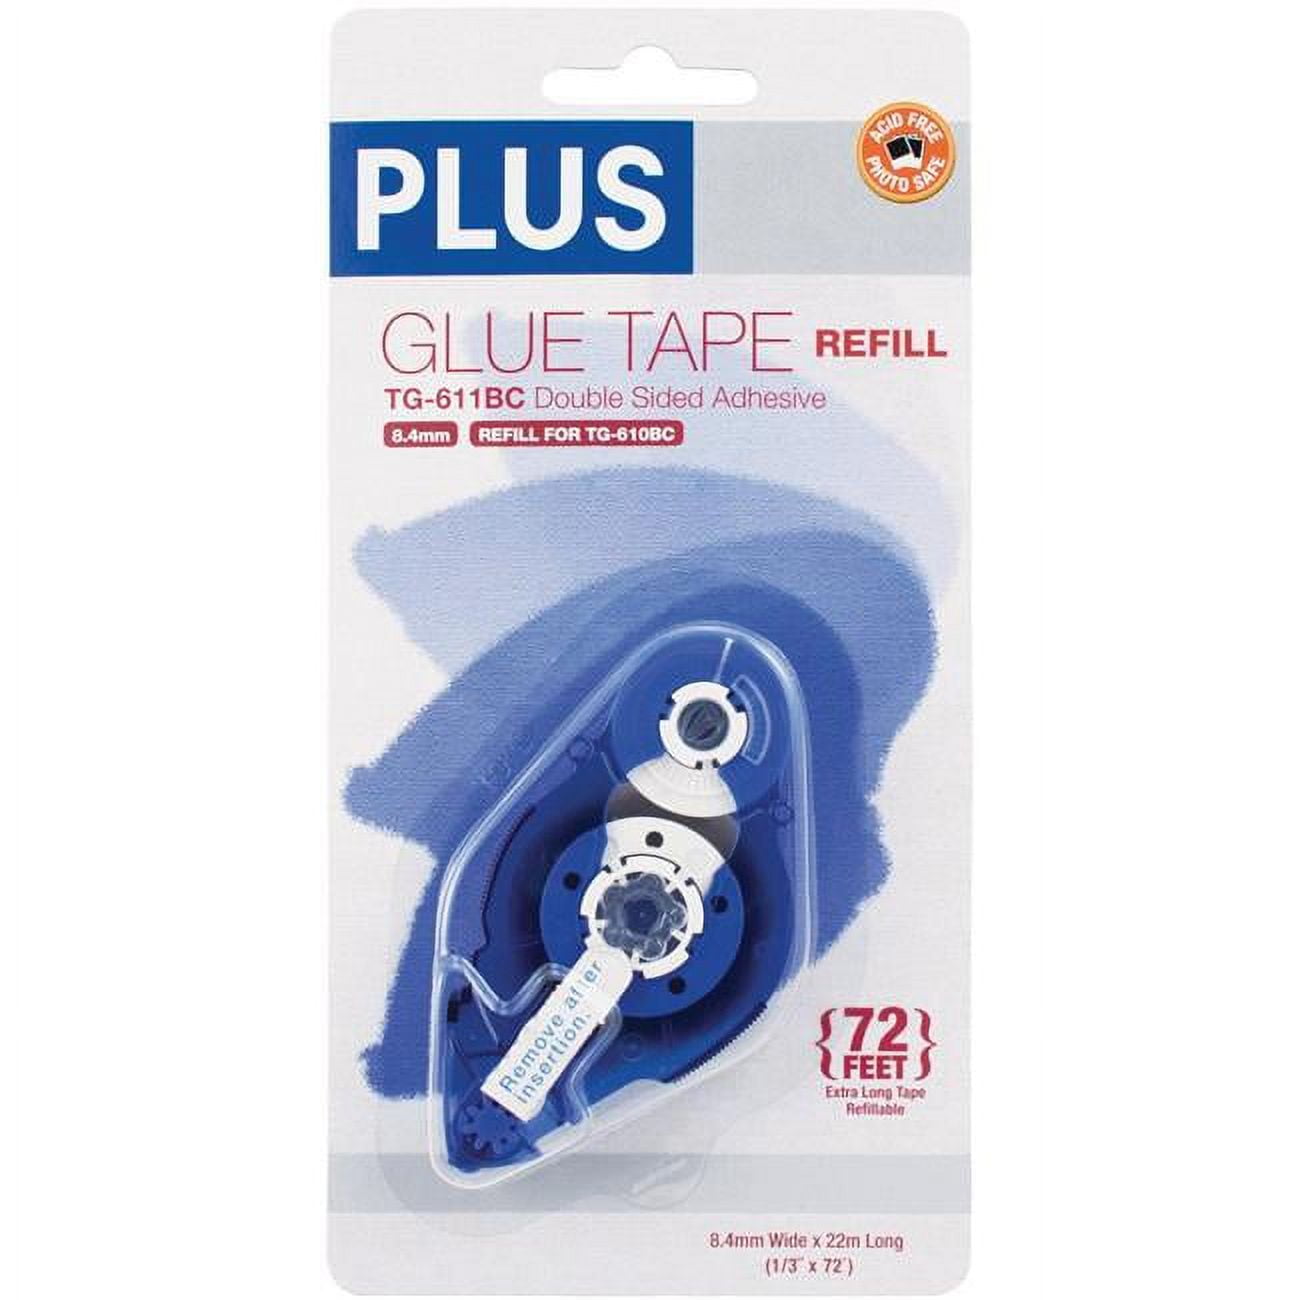 Plus Tape Glue Eco Permanent Adhesive Refillable Glue Tape 8.4mm x Length  10m with 2 Refills